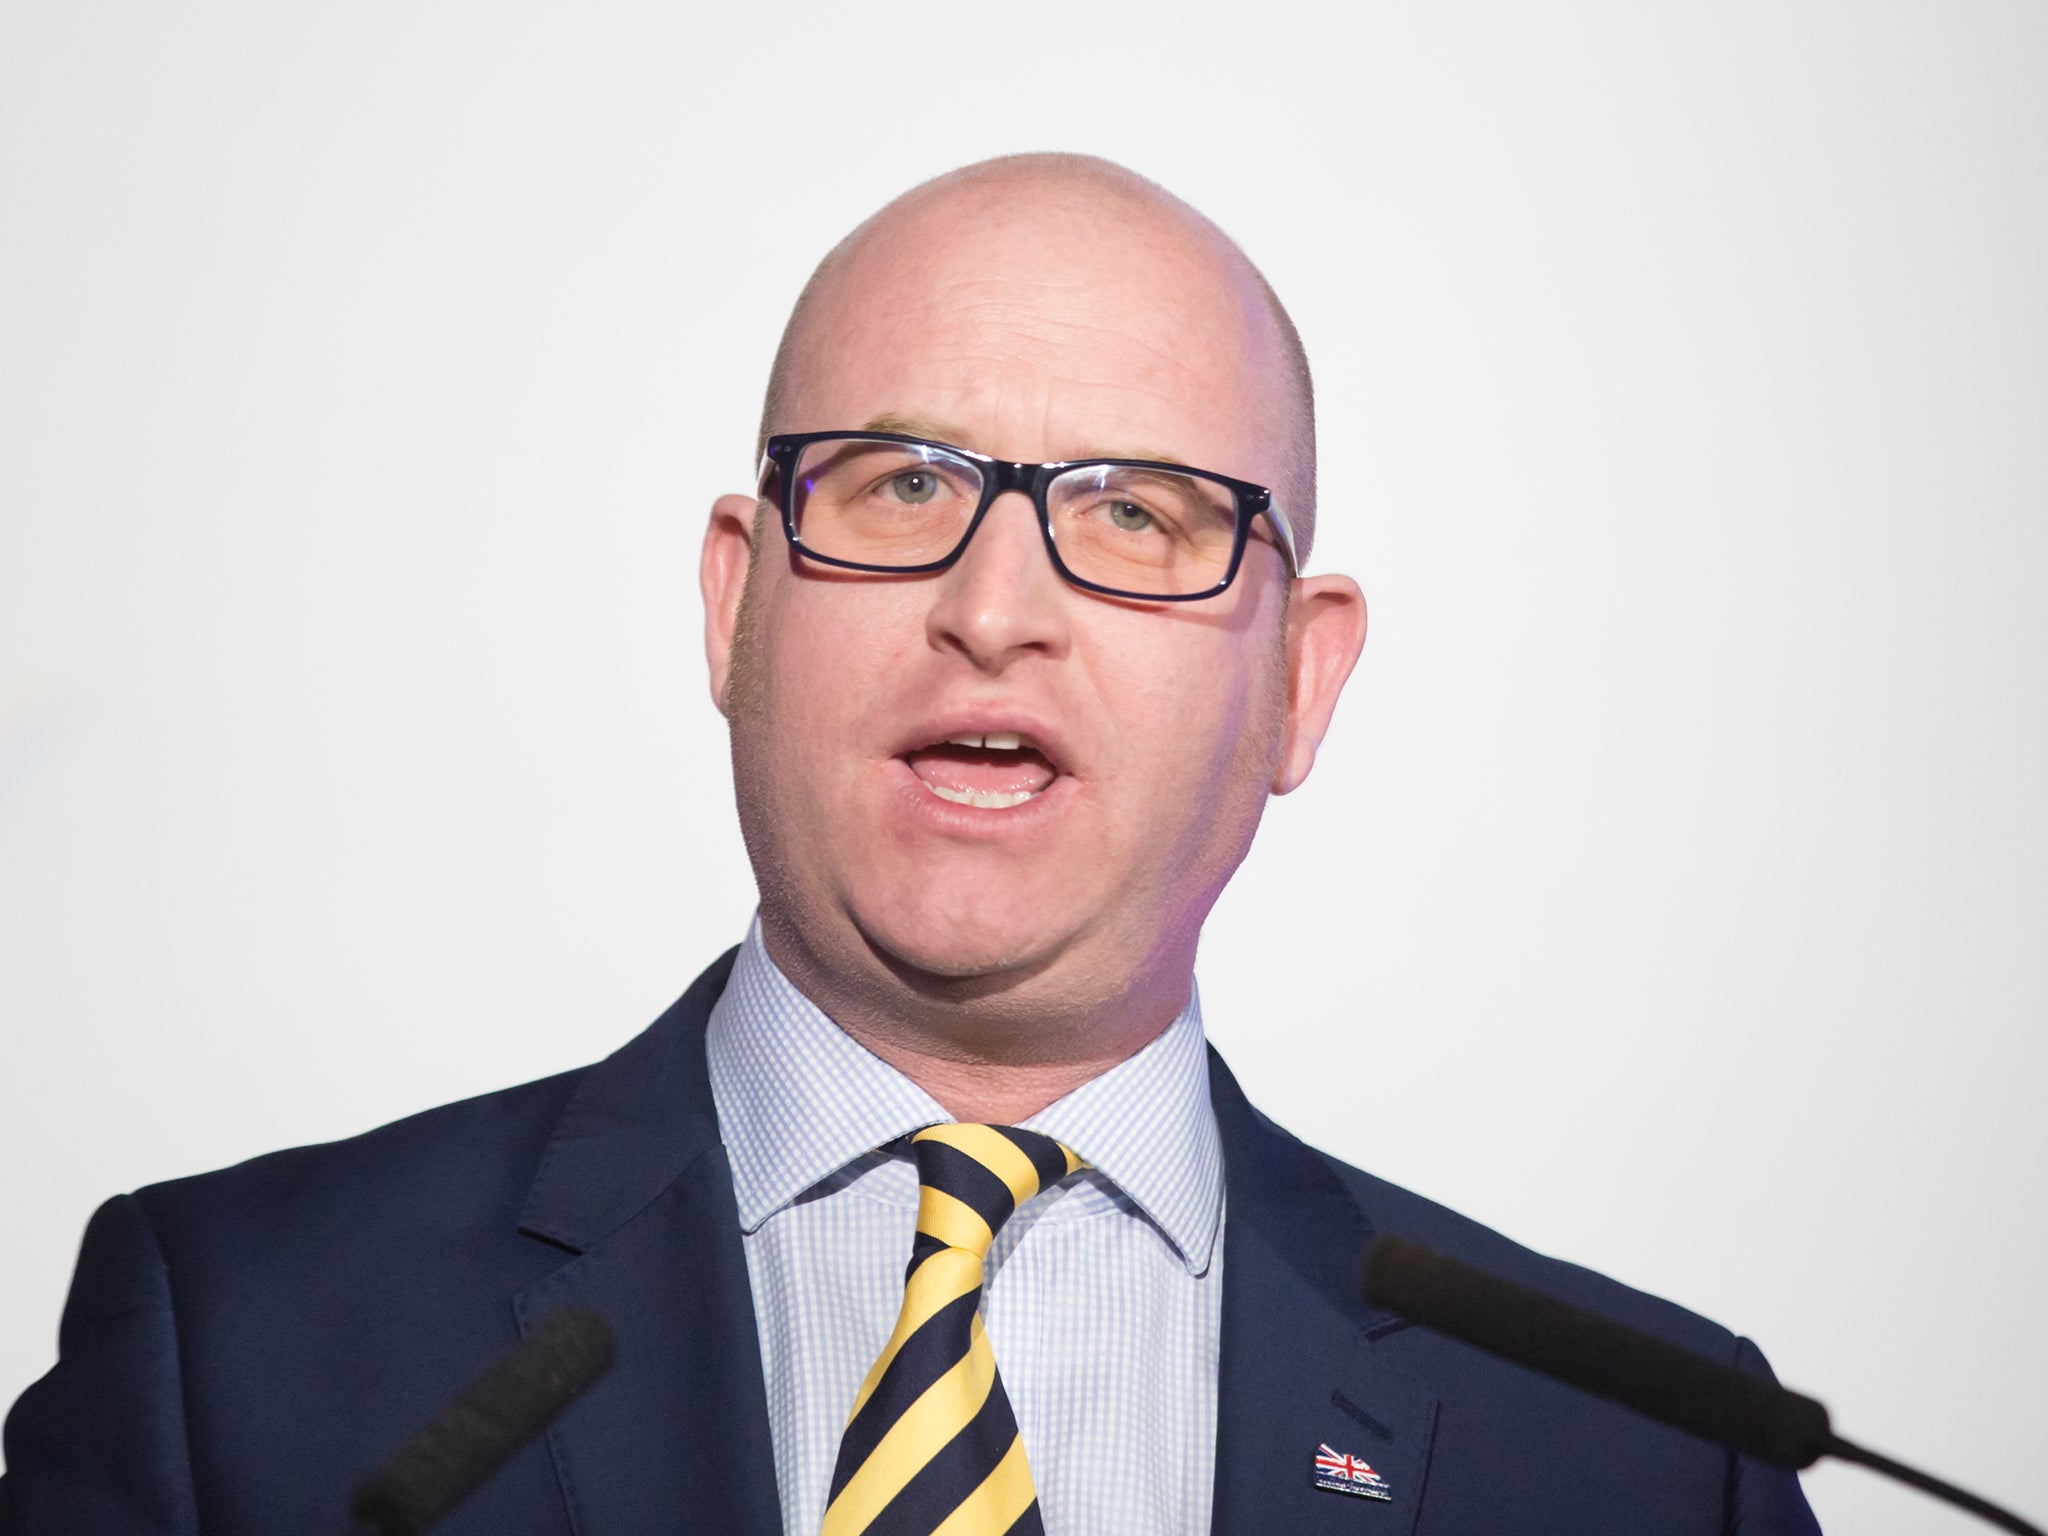 Nuttall is Ukip deputy leader and MEP for the North West of England